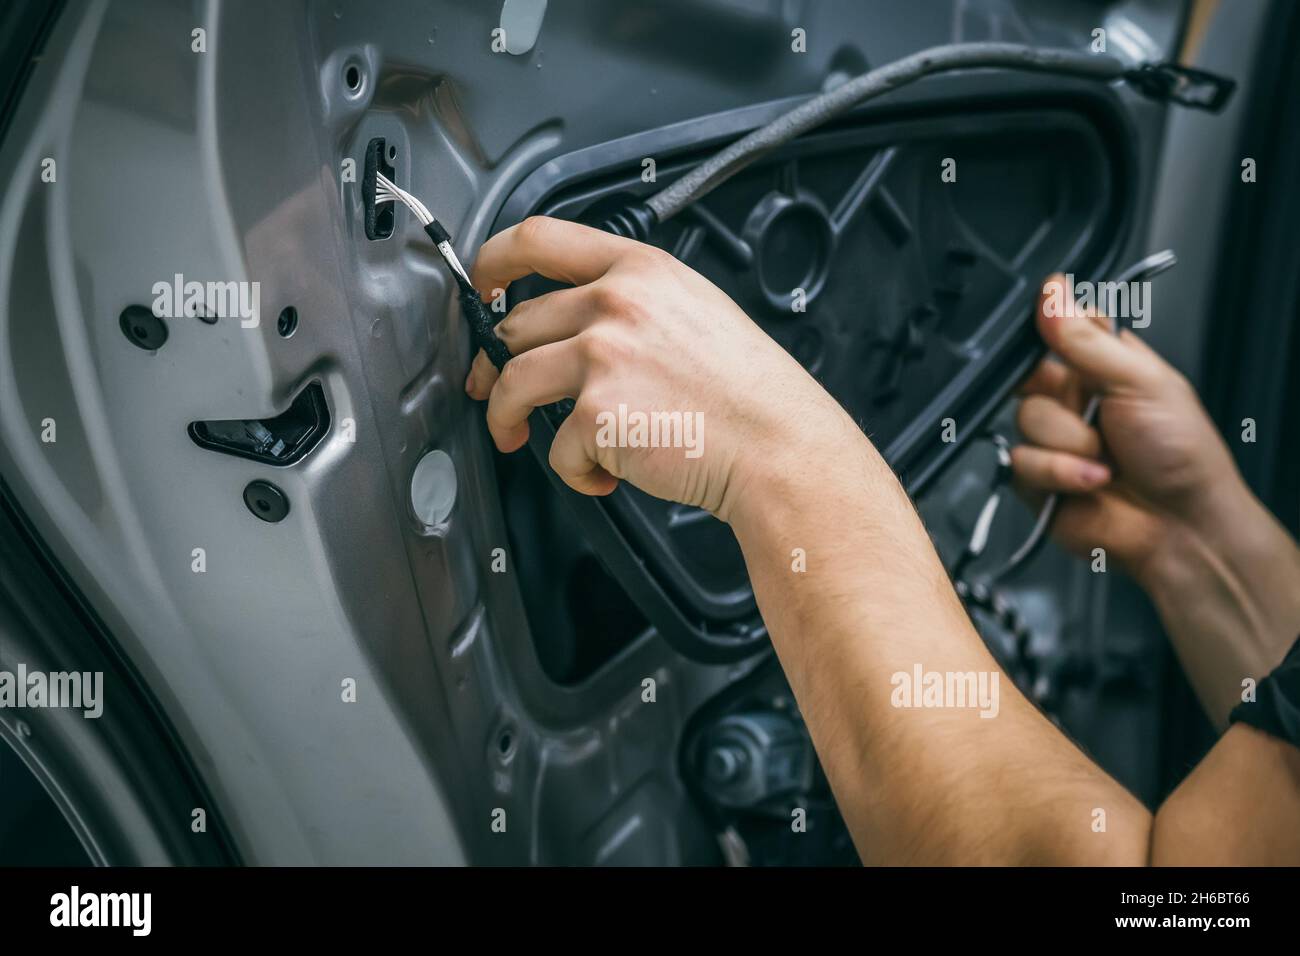 Auto service worker disassembles car door for repair, restoration, tuning car sound or installing noise insulation or soundproofing. Stock Photo